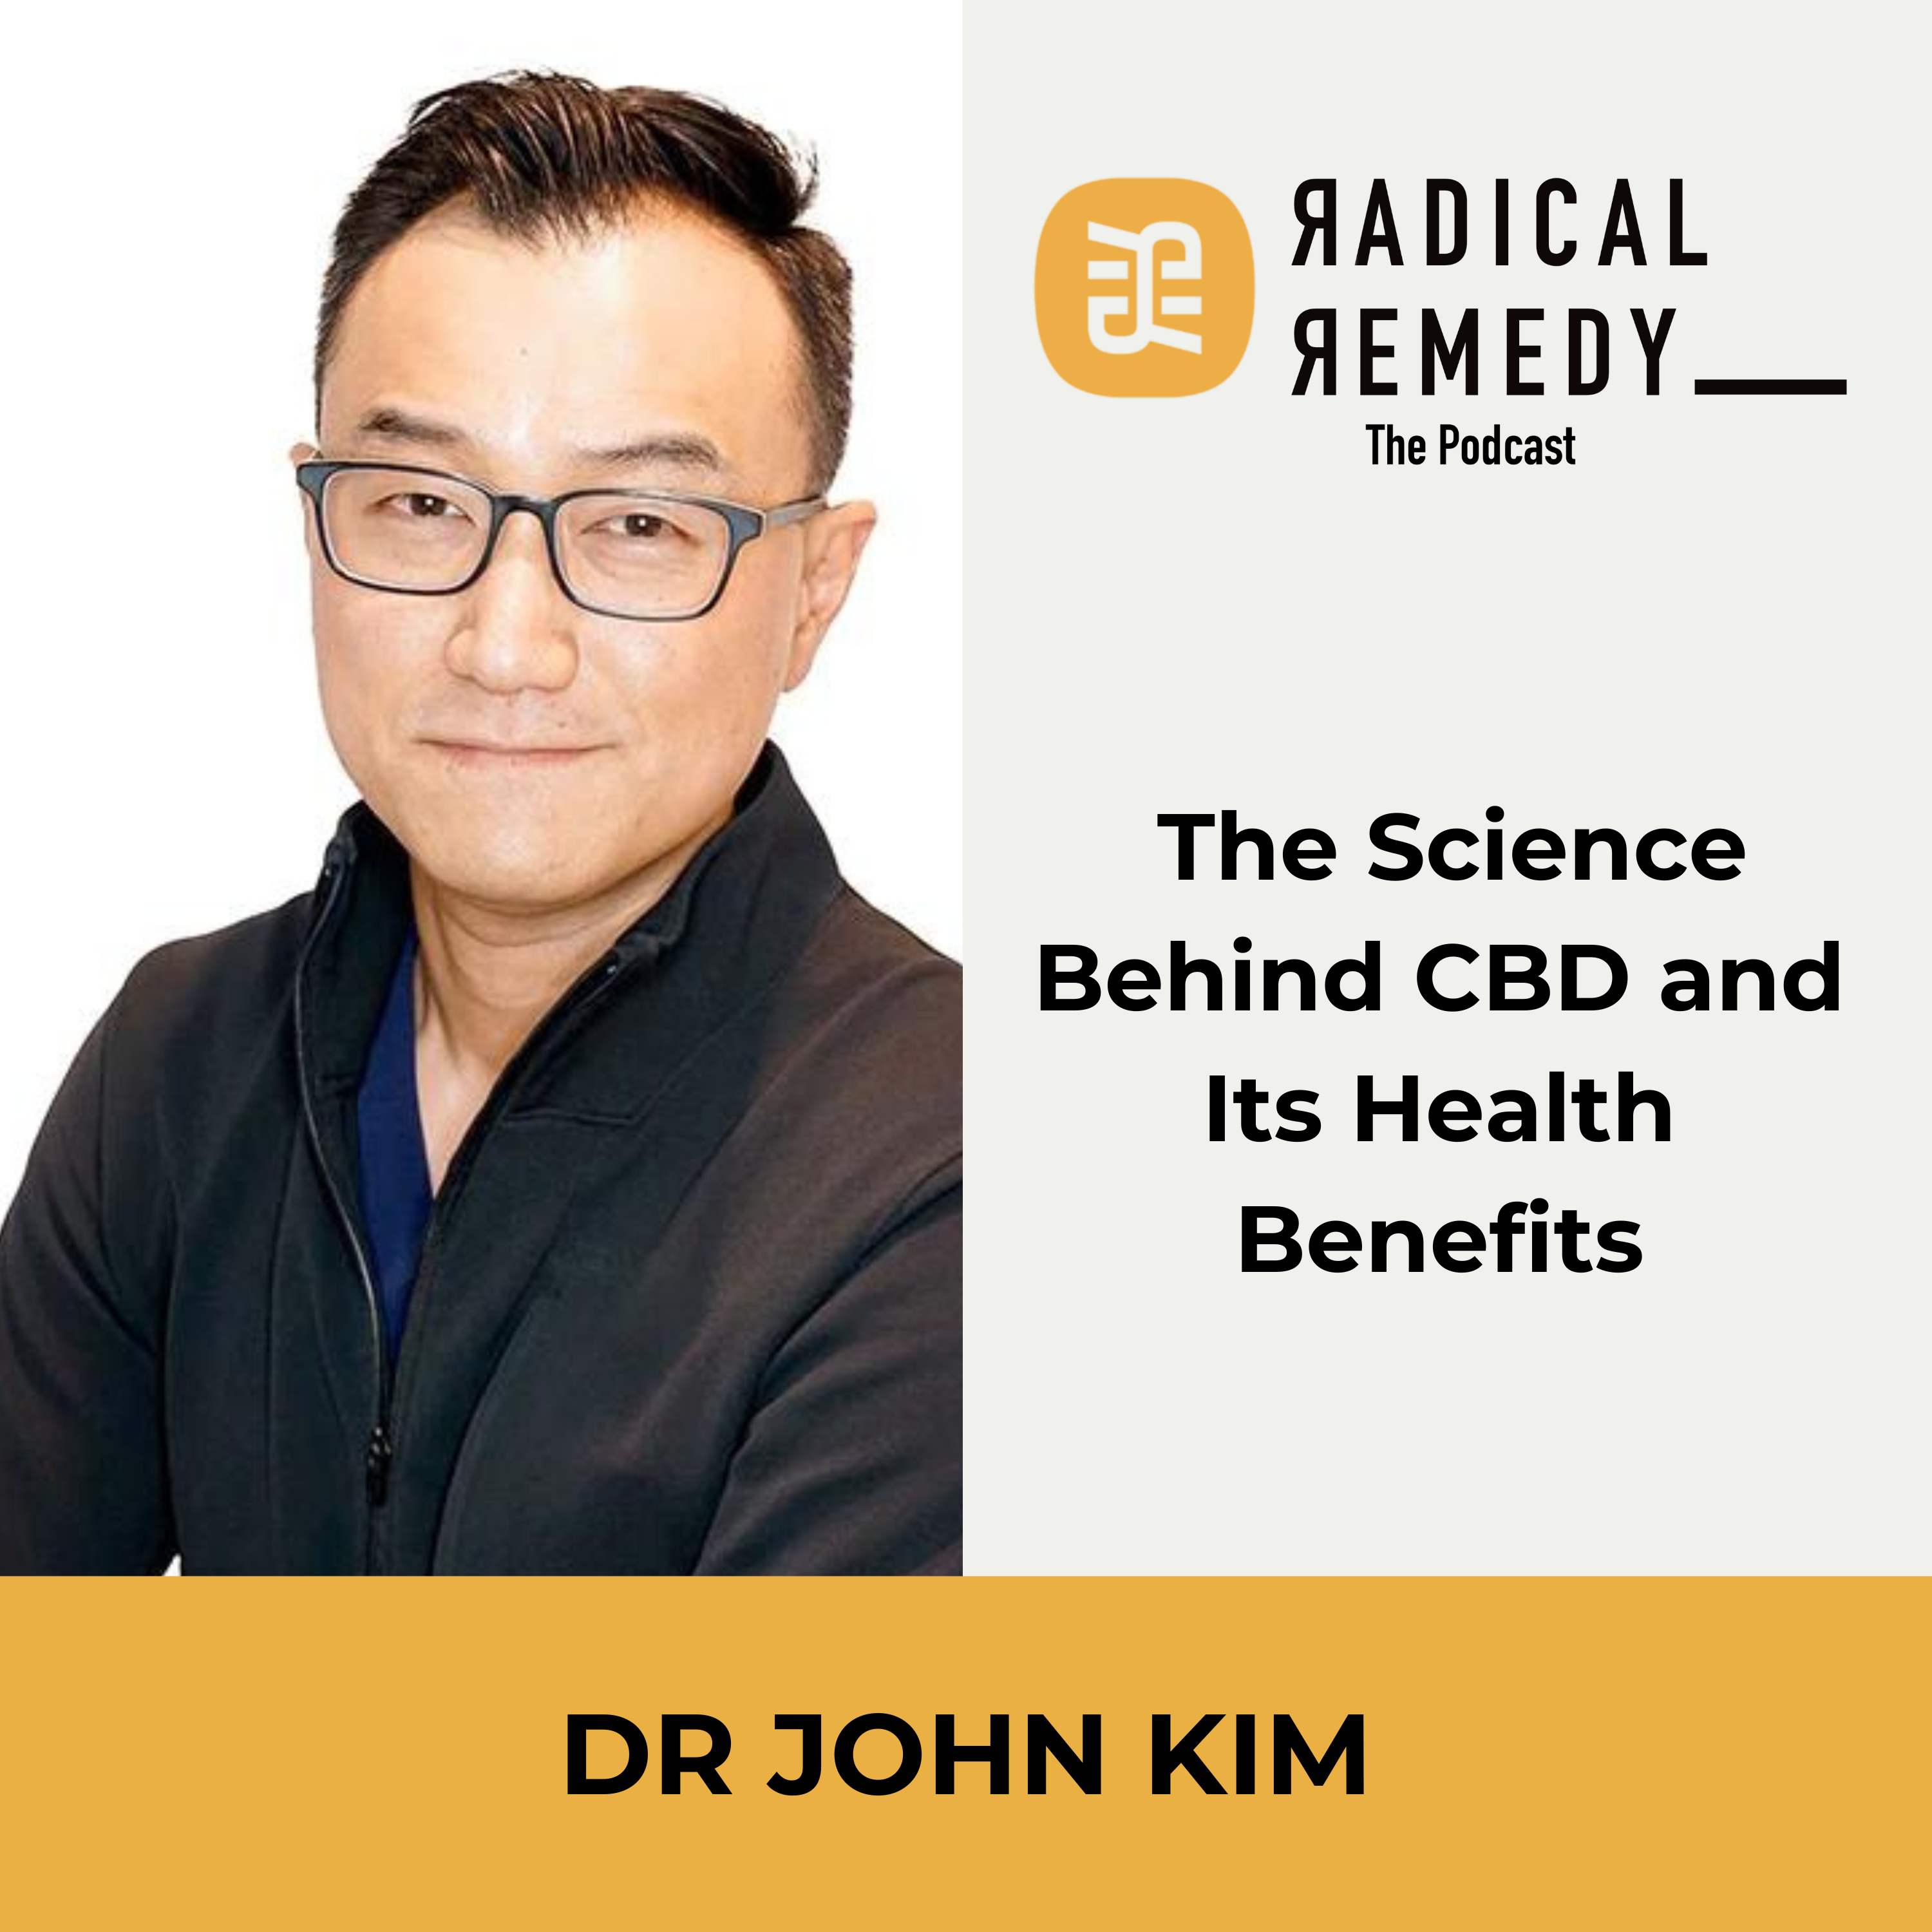 Dr John Kim - The Science Behind CBD and Its Health Benefits